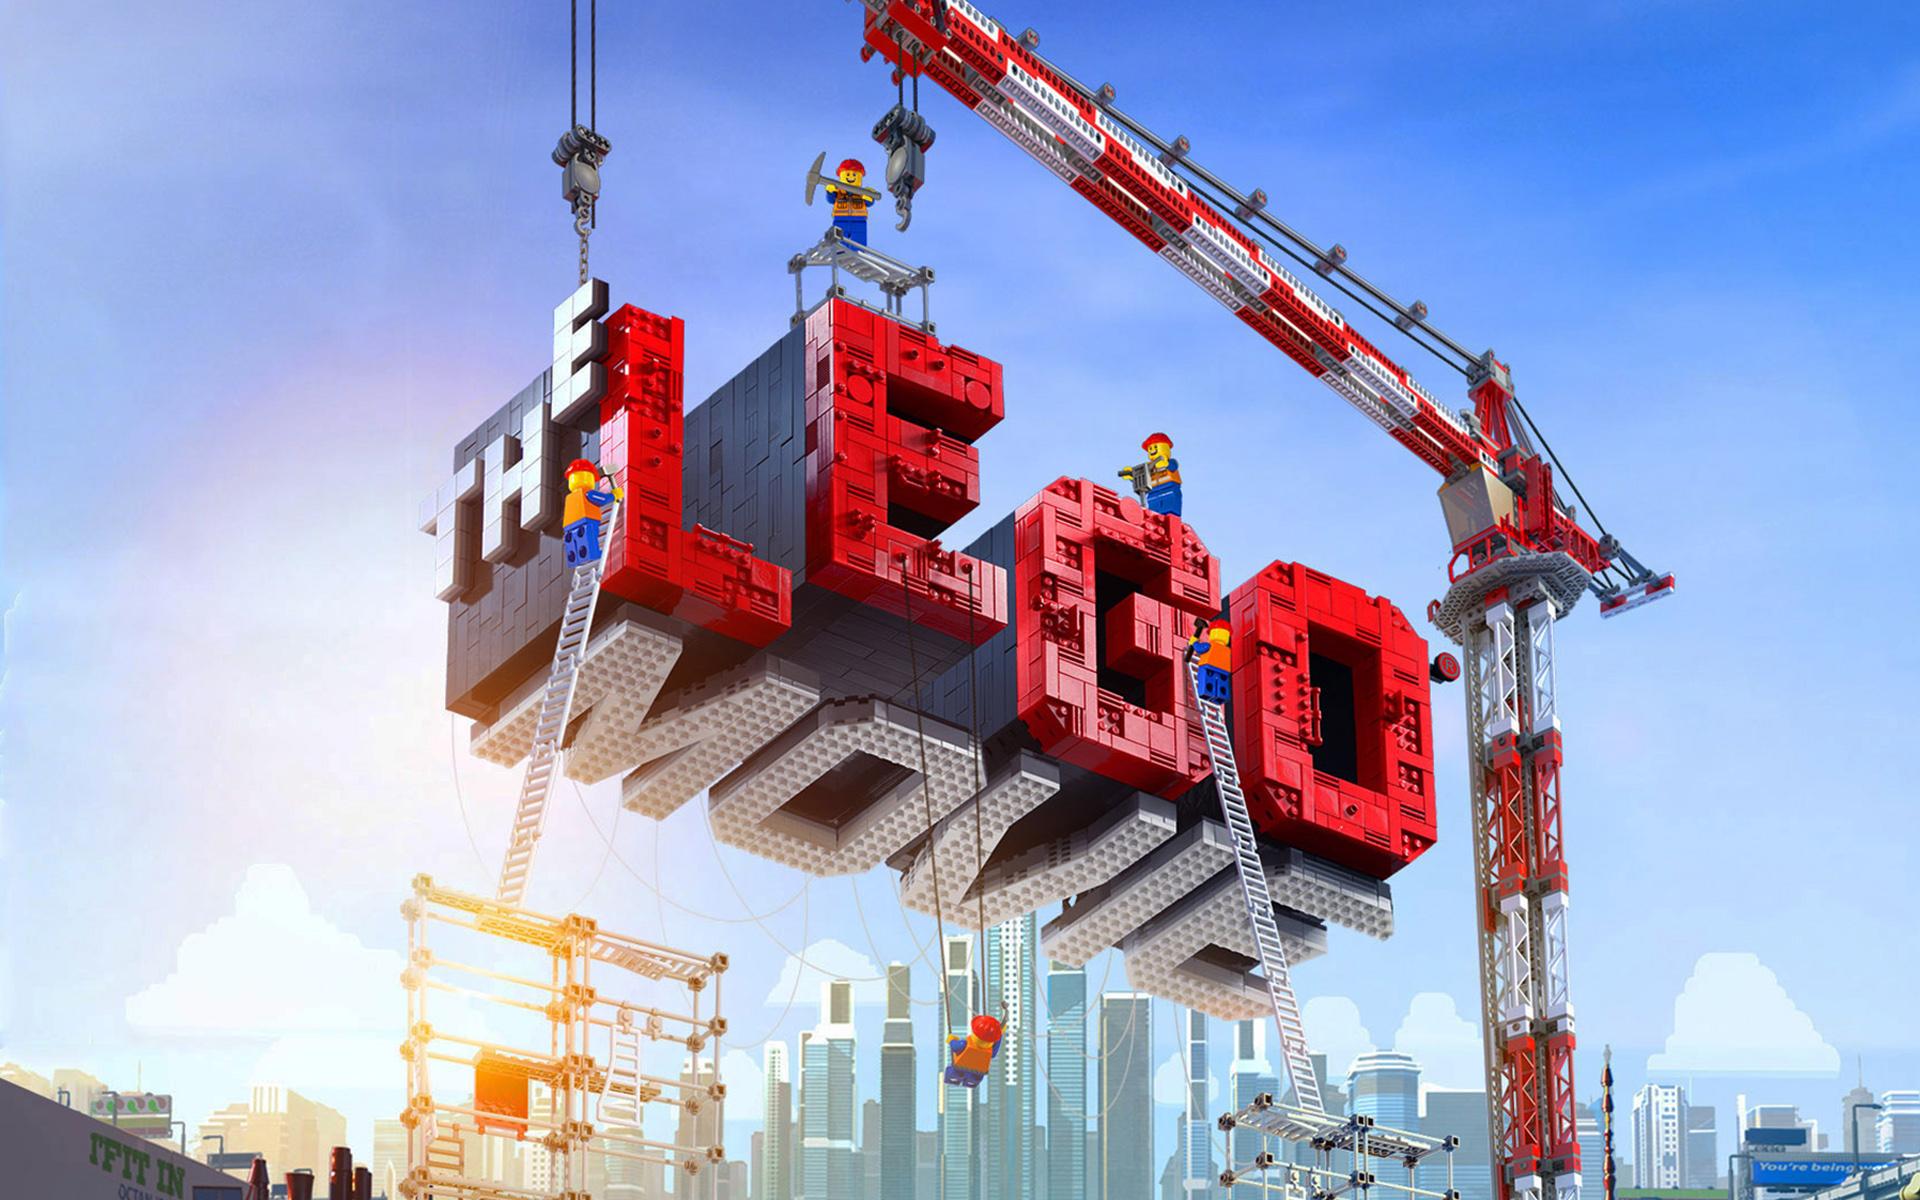 The Lego Movie Wallpaper, High Definition, High Quality